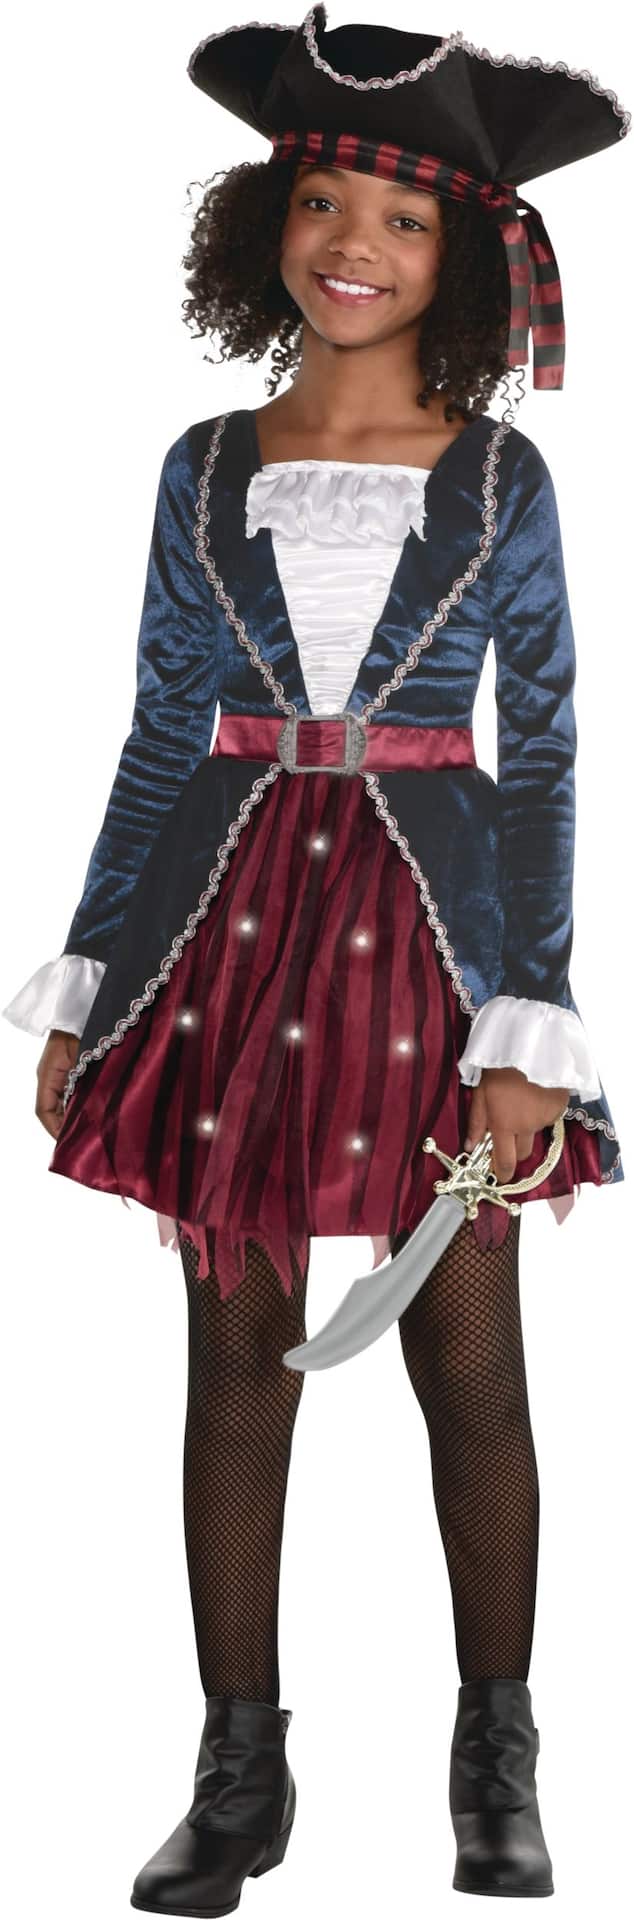 Kids' Pirate Blue/Red Light-Up Dress with Hat Halloween Costume